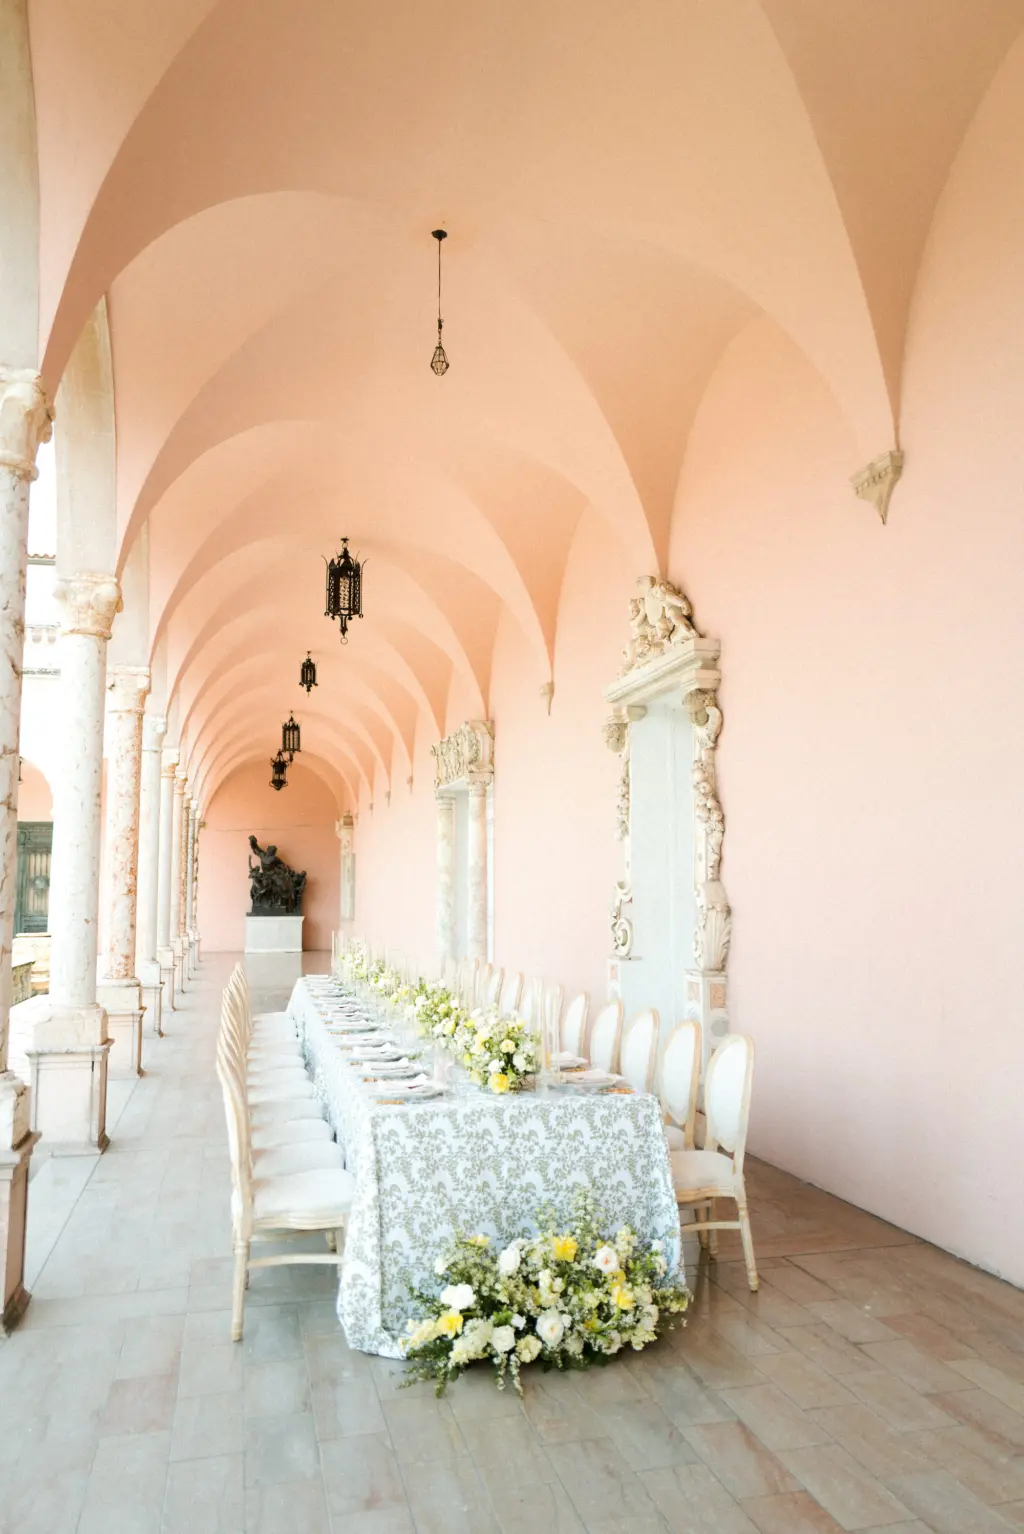 Intimate Italian Outdoor Wedding Reception | Long Feasting Table Inspiration with Damask Table Linen and Louis Chairs | Sarasota Venue The Ringling Museum and Gardens